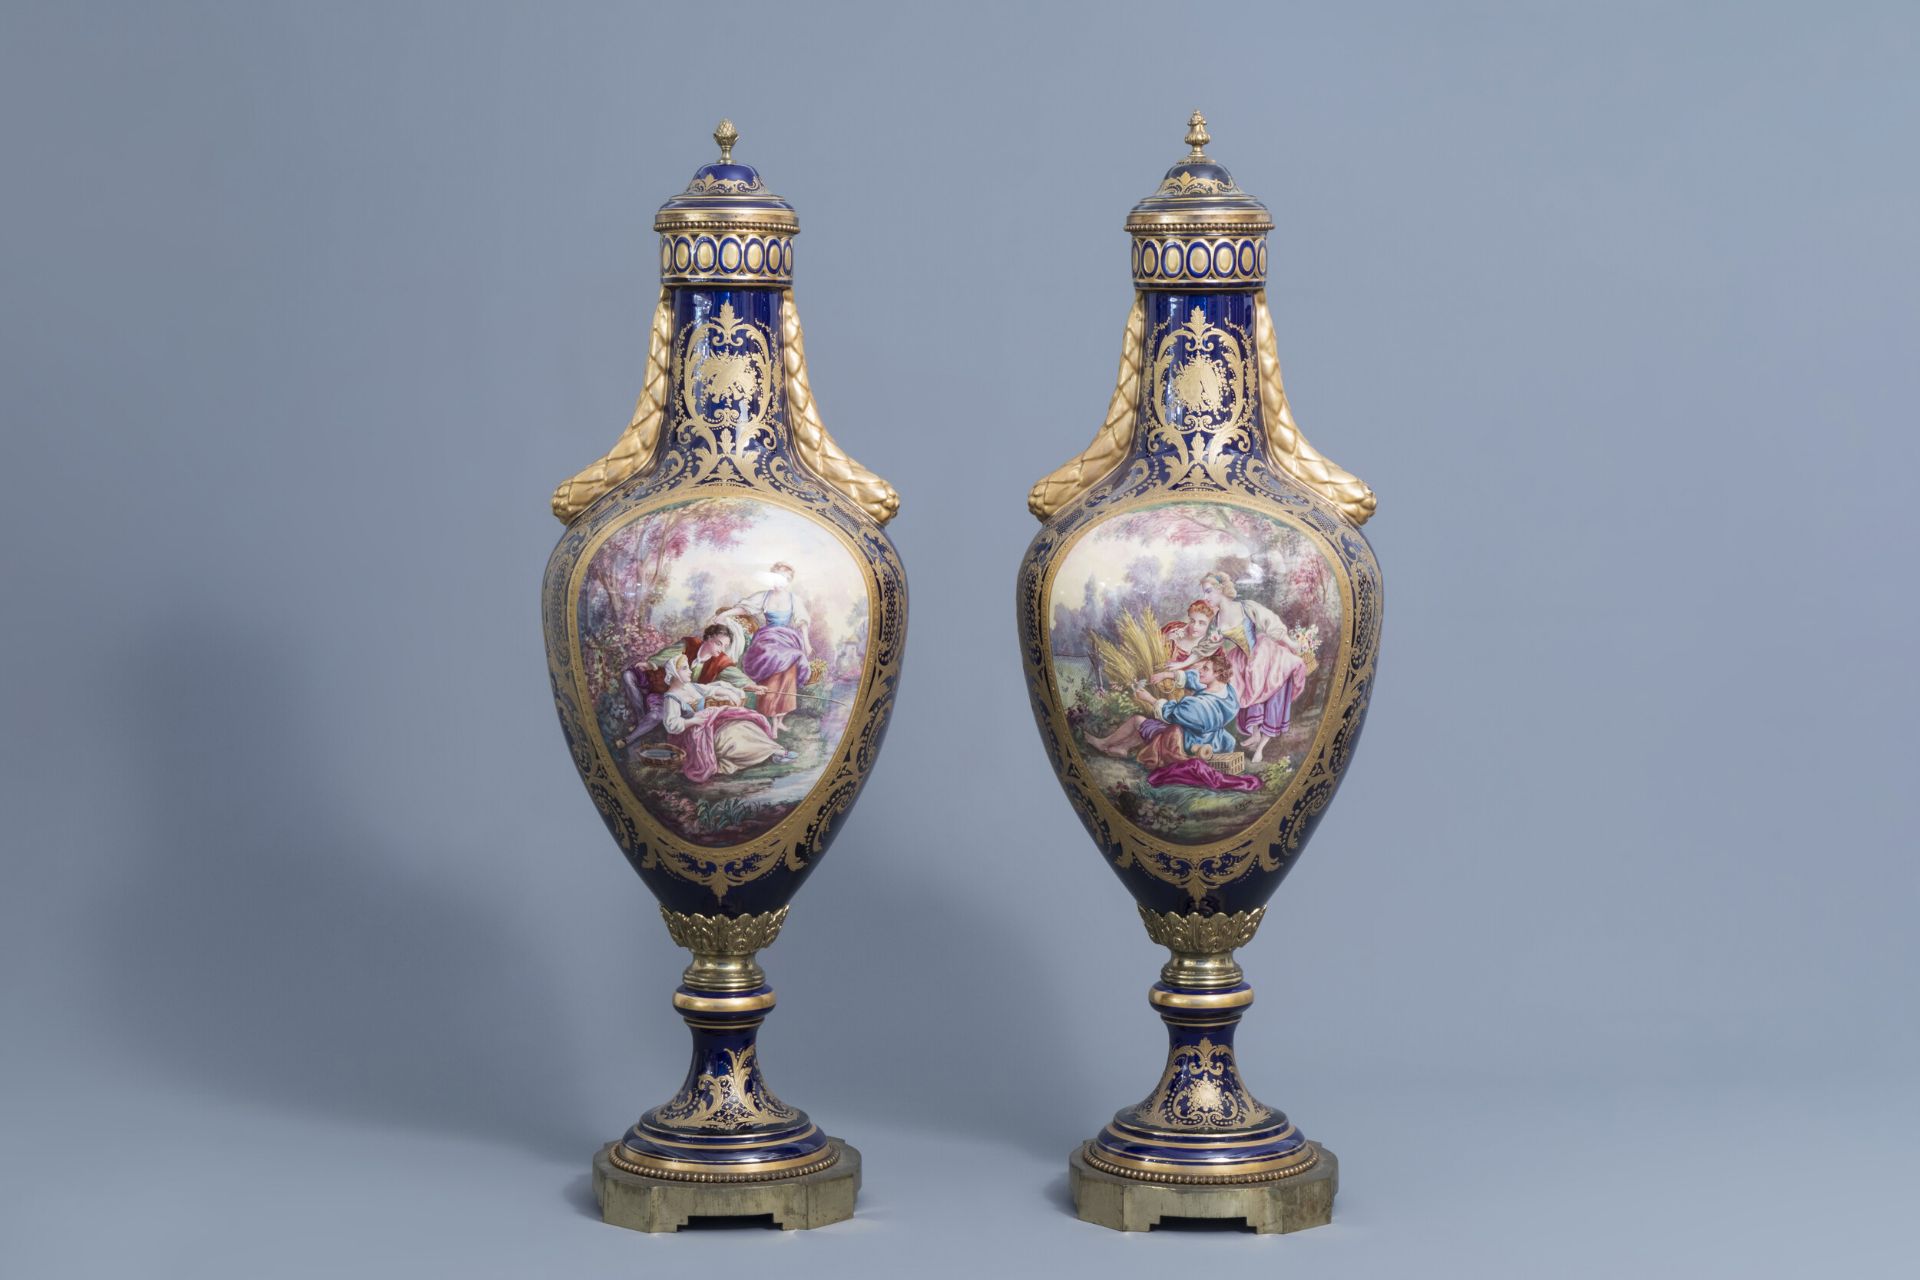 A pair of large French Svres styles vases and covers with gallant scenes and landscapes, 20th C.